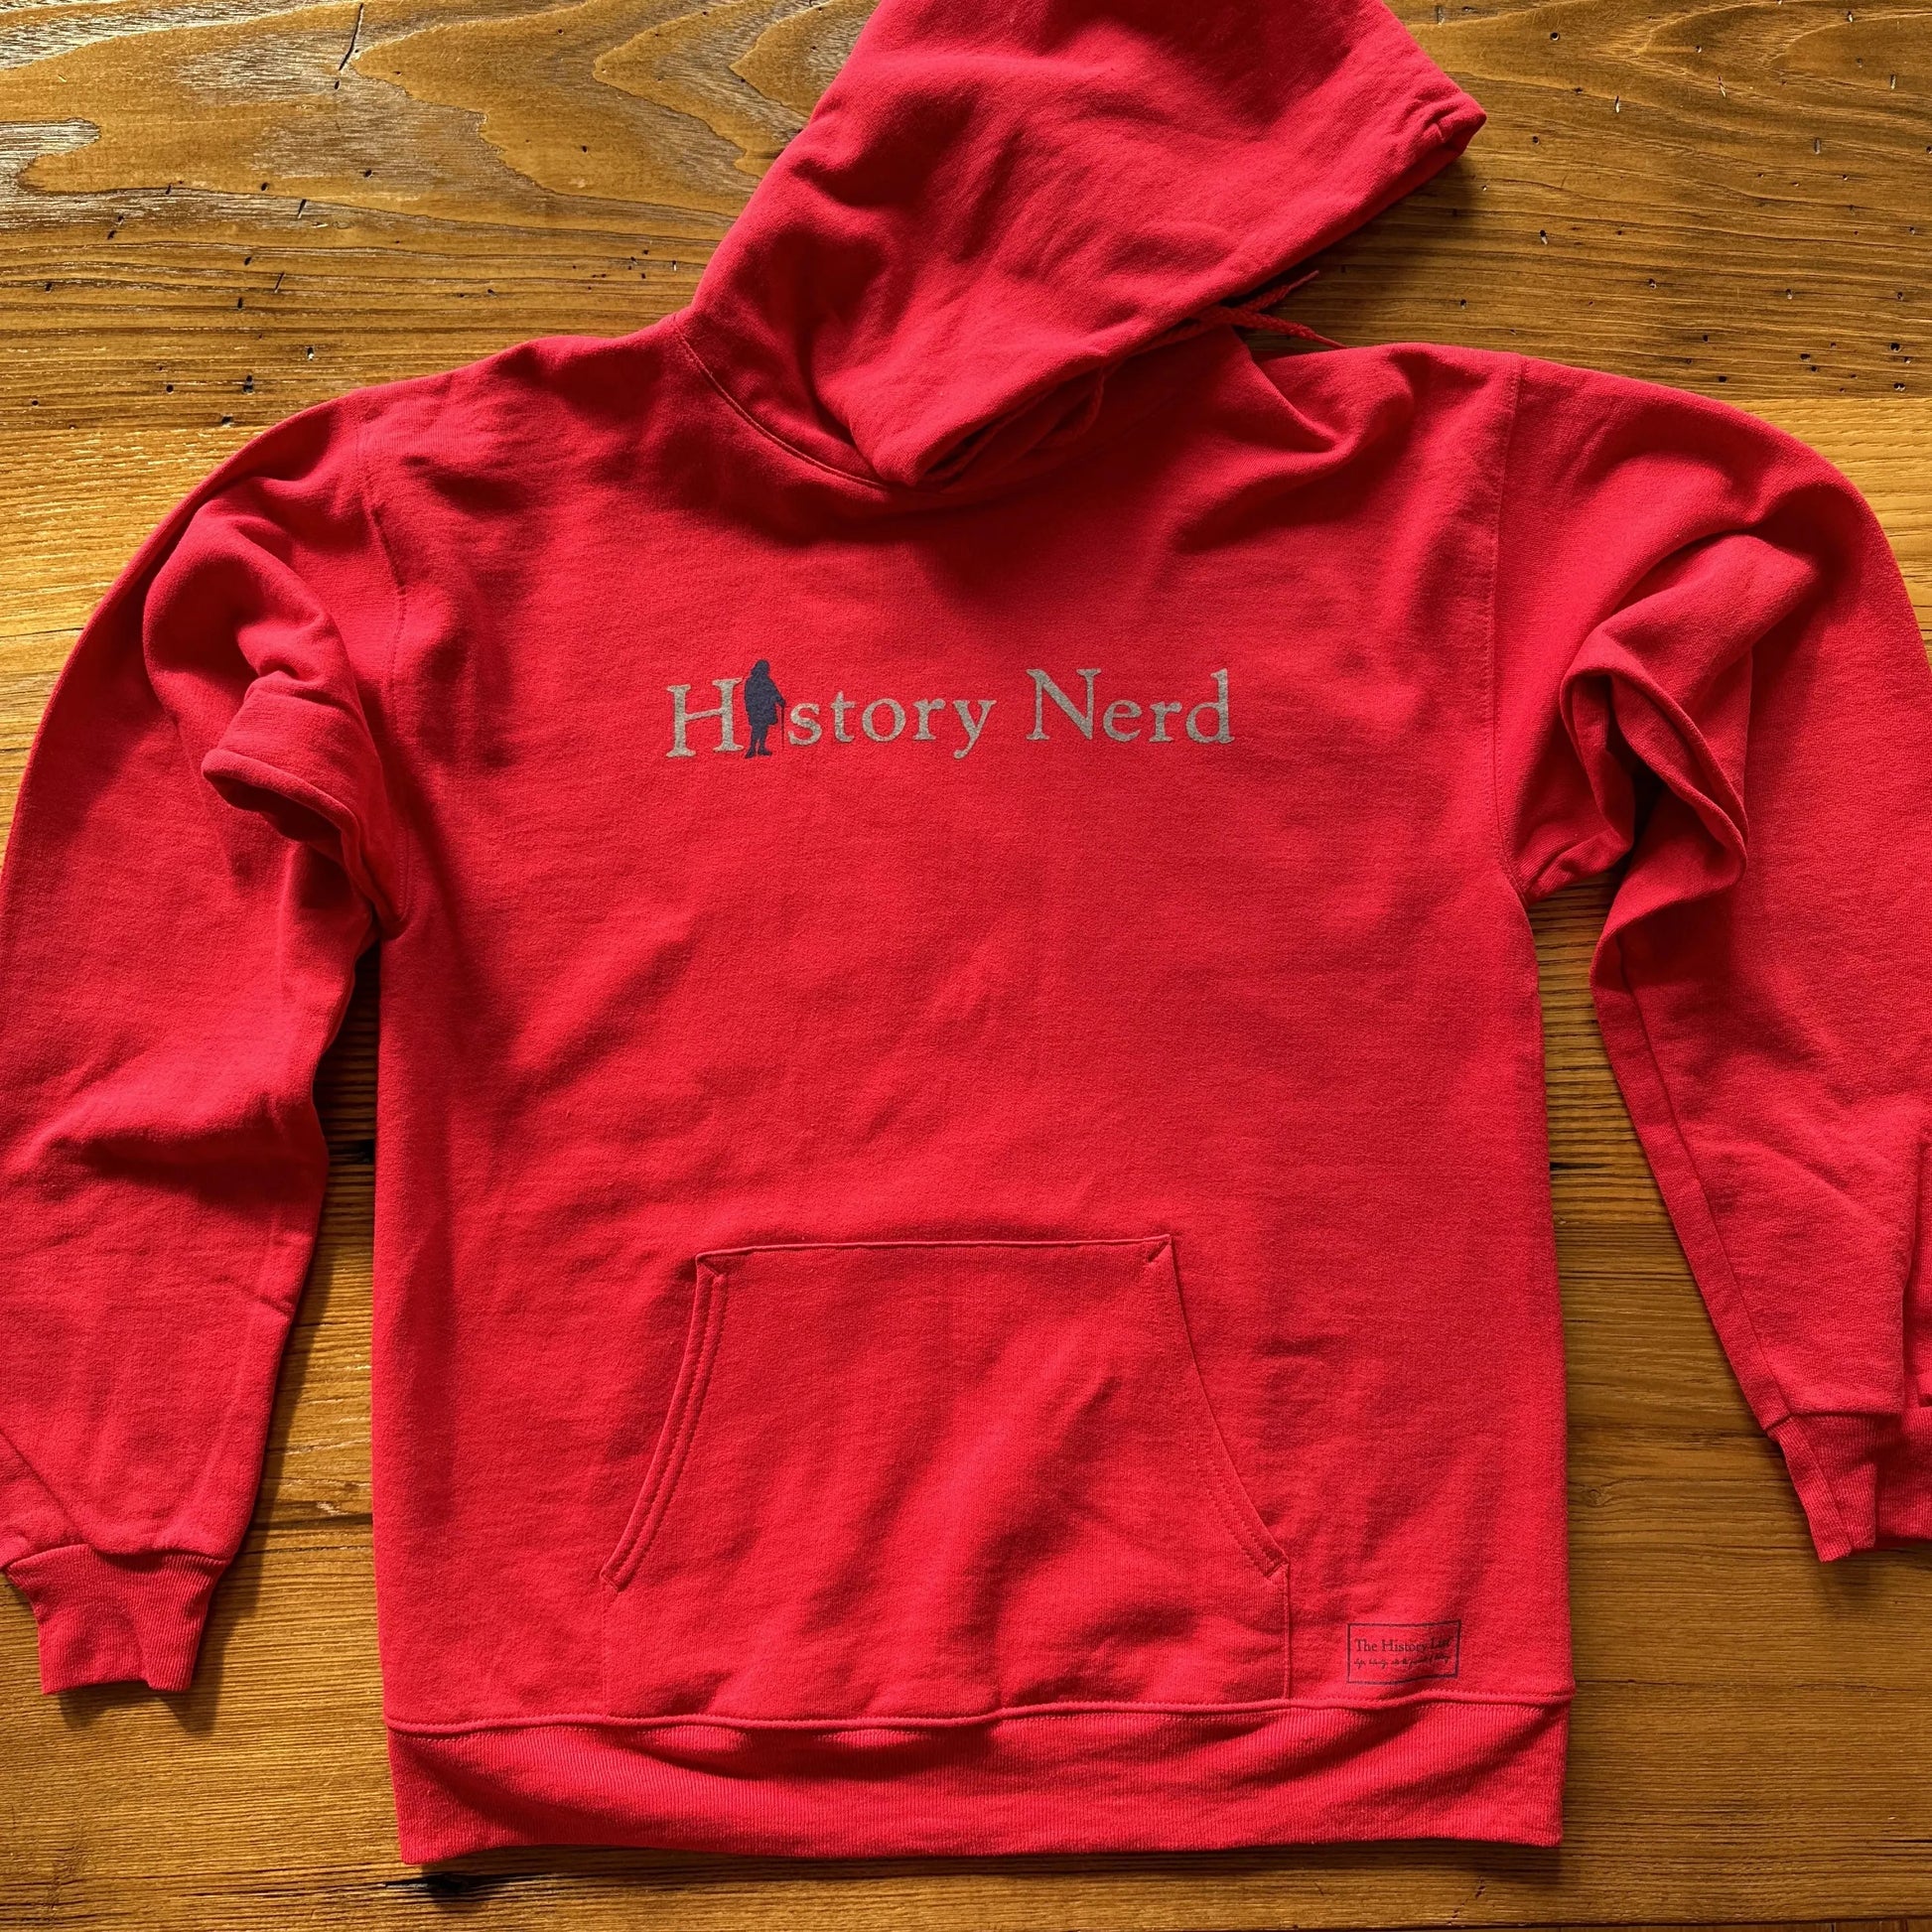 HISTORY NERD® Pullover sweatshirt with Ben Franklin in deep red color from The History List store